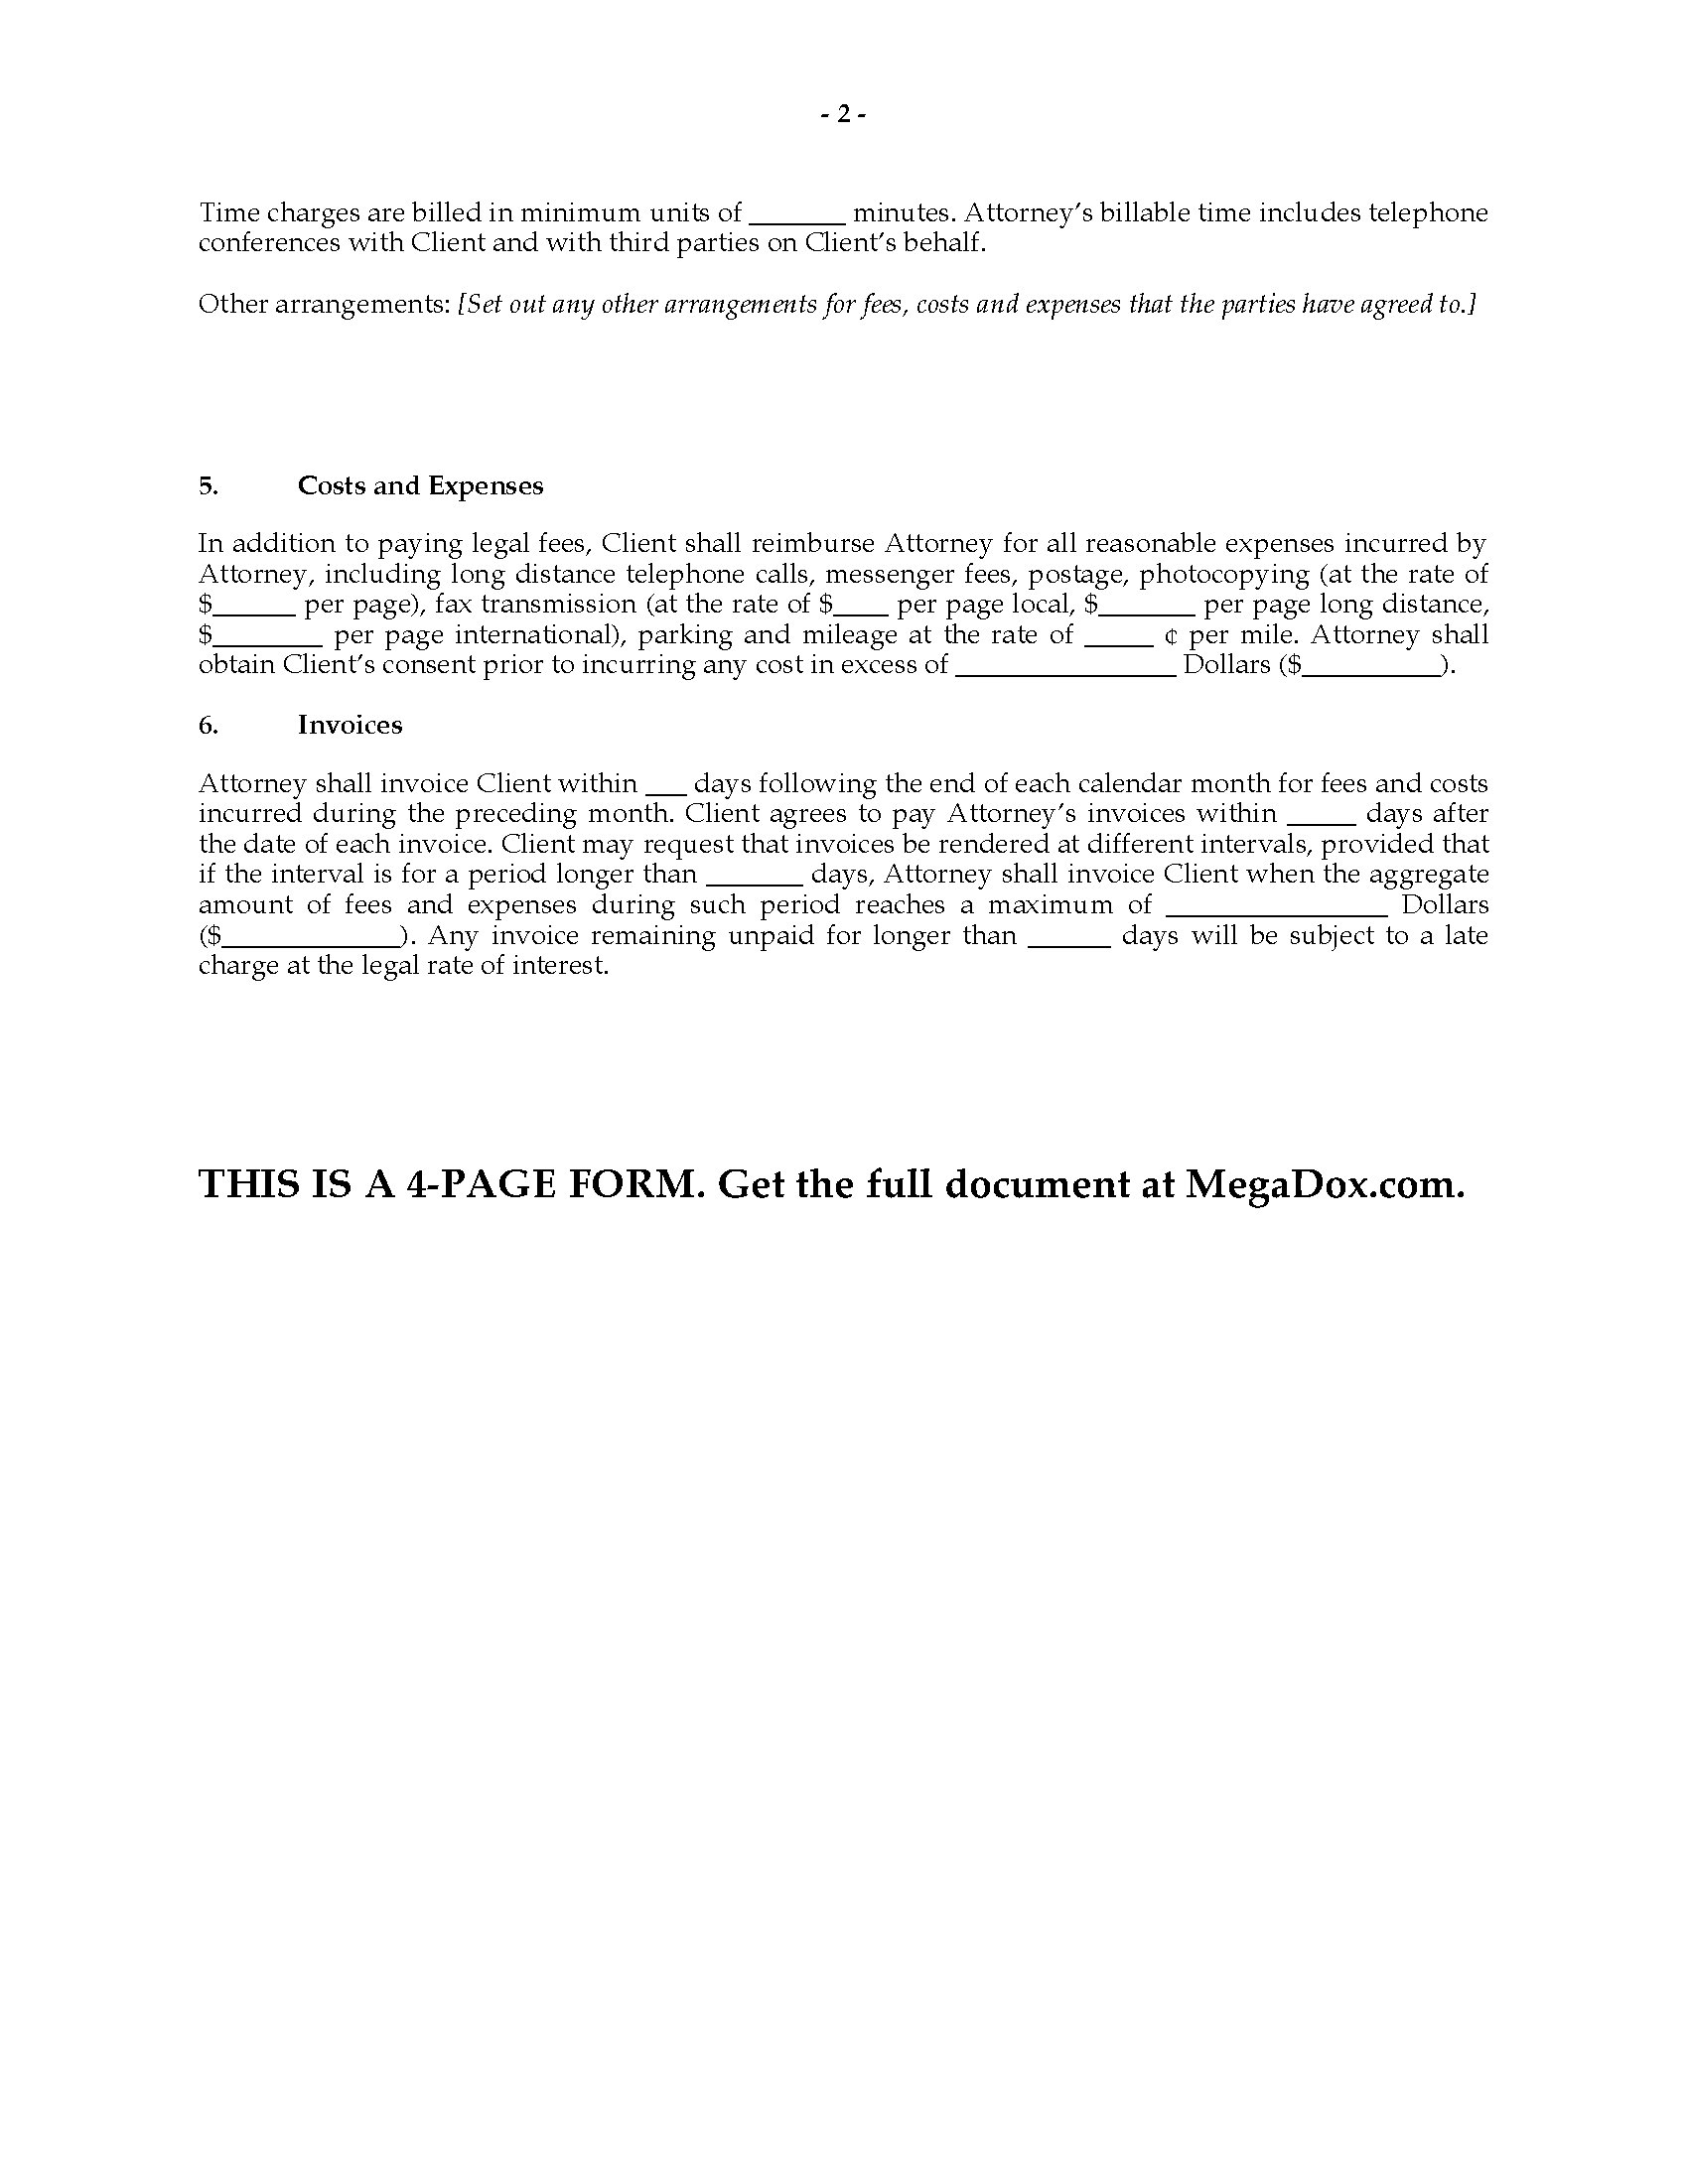 California Attorney Retainer Agreement Legal Forms and Business